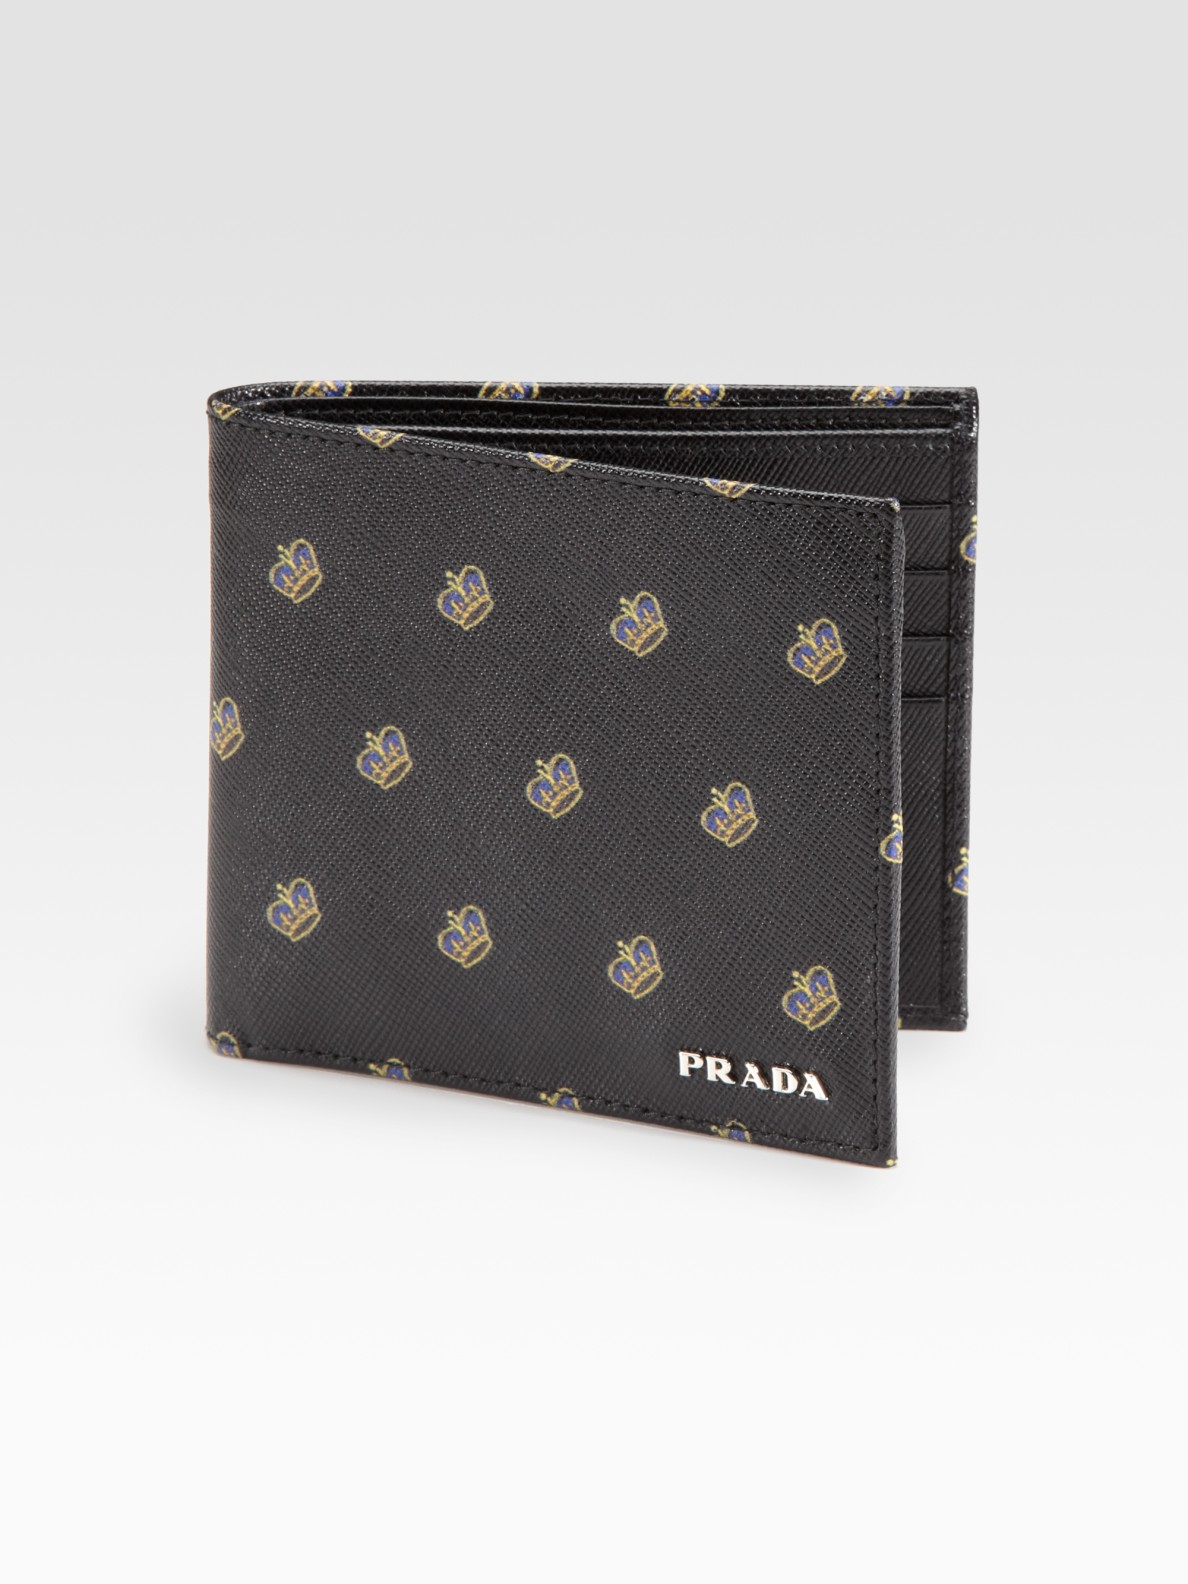 Prada Saffiano Printed Leather Wallet in Black for Men | Lyst